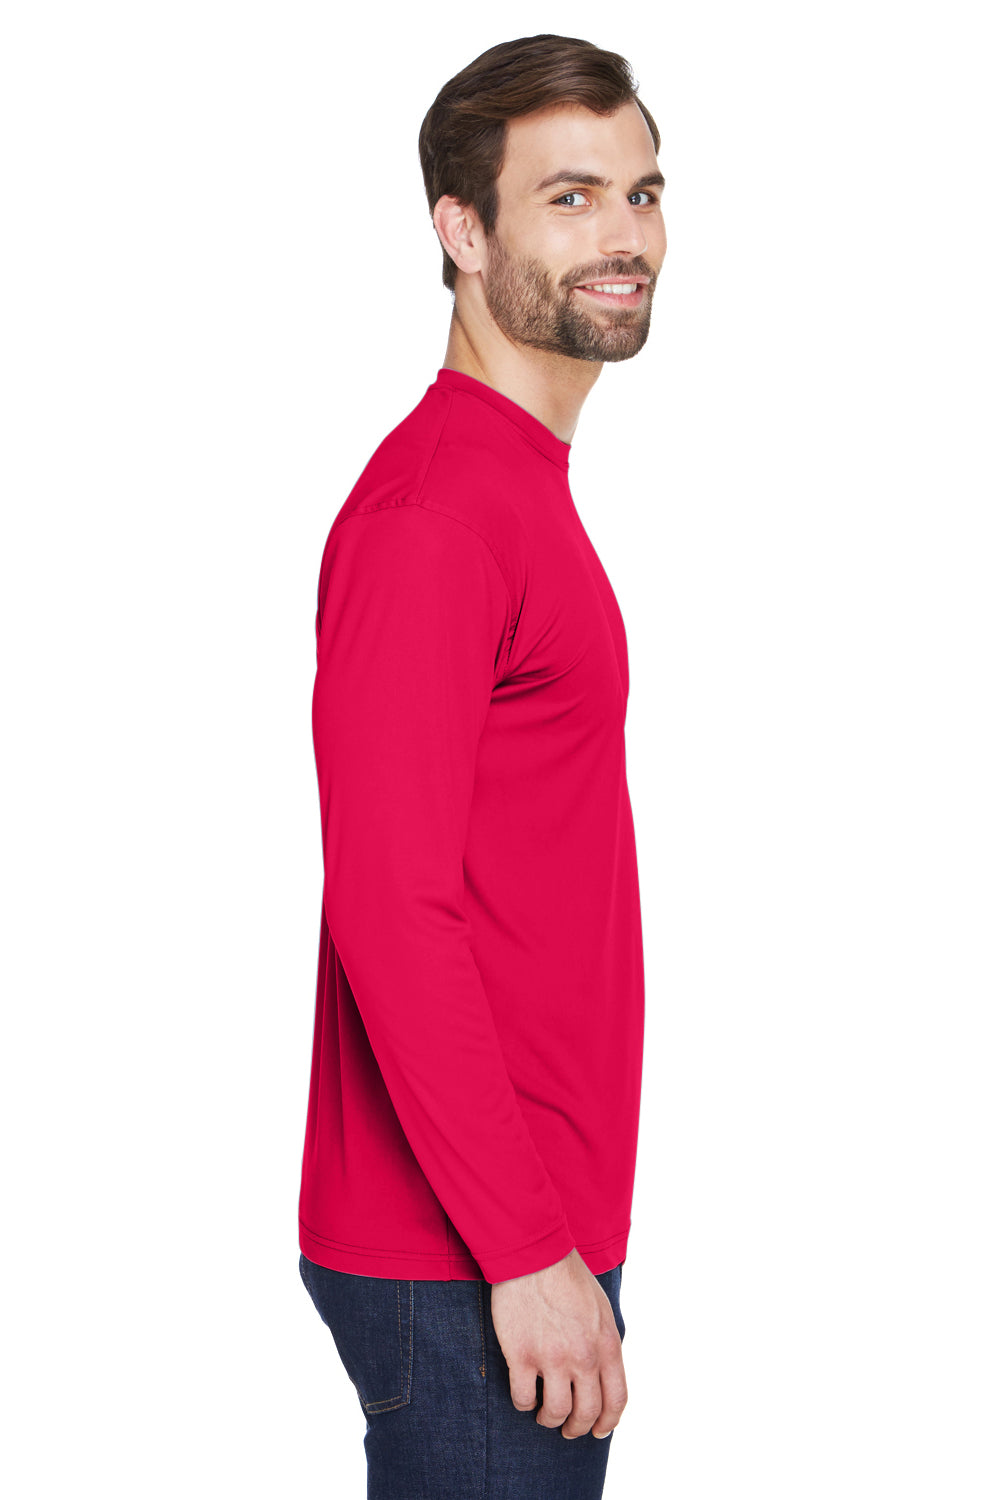 UltraClub 8422 Mens Cool & Dry Performance Moisture Wicking Long Sleeve Crewneck T-Shirt Red Side